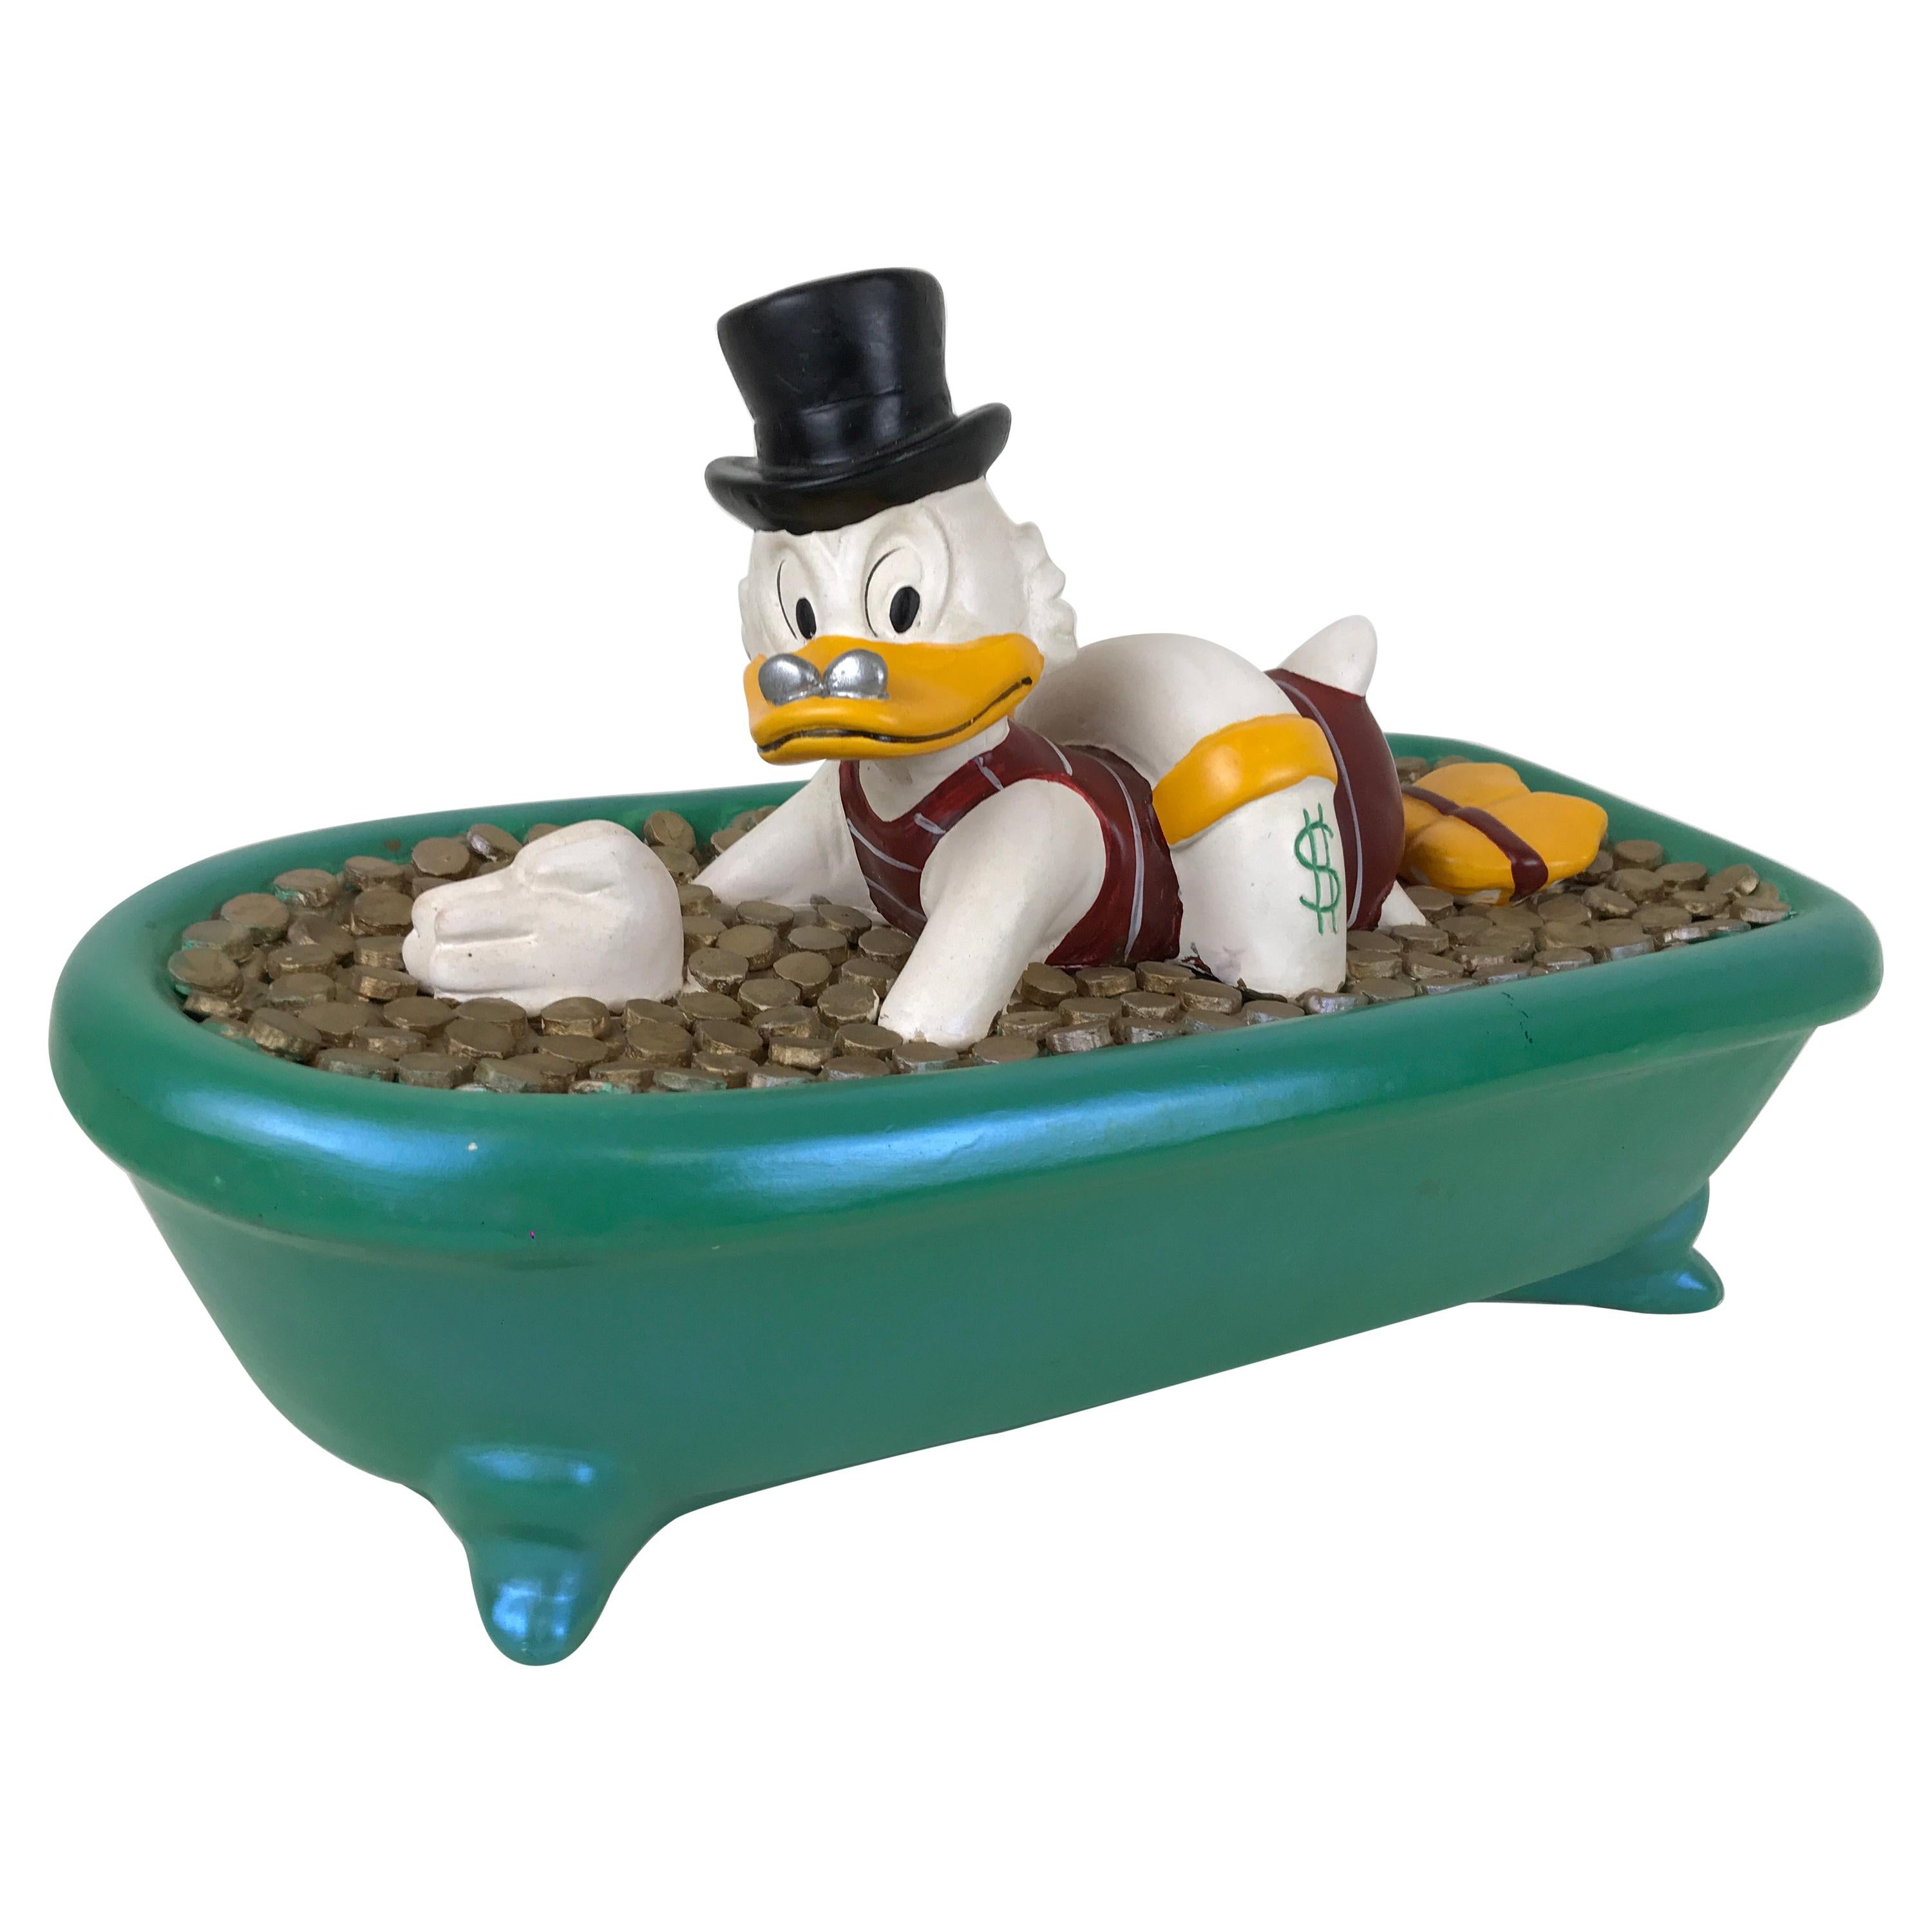 1990s Disney Uncle Scrooge in a Bathtub Filled with Money by Demons & Merveilles For Sale